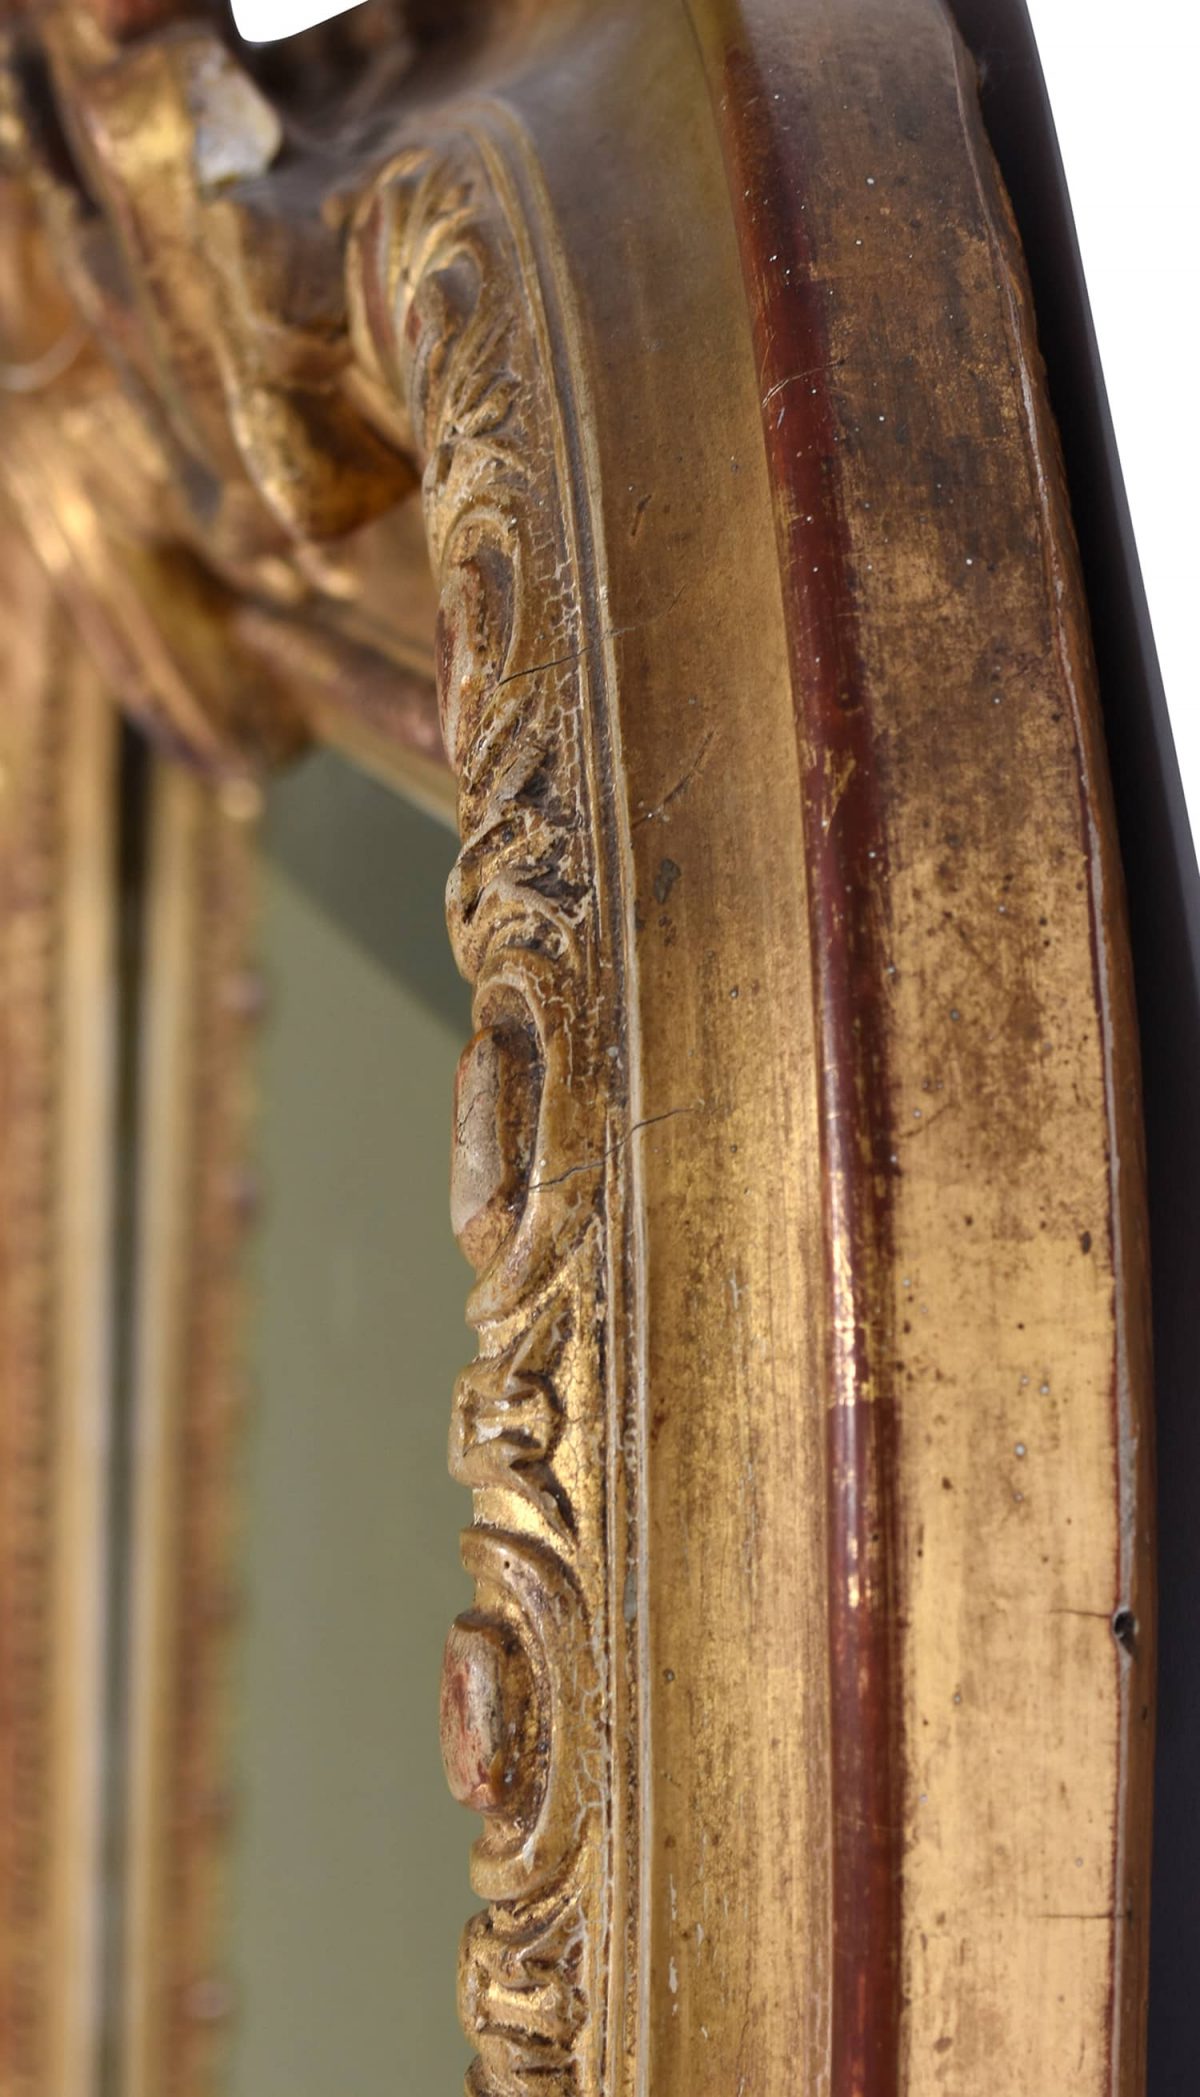 Antique French Gold Leaf Gilt Louis Philippe Style Mirror with Crest. France 19th Century.